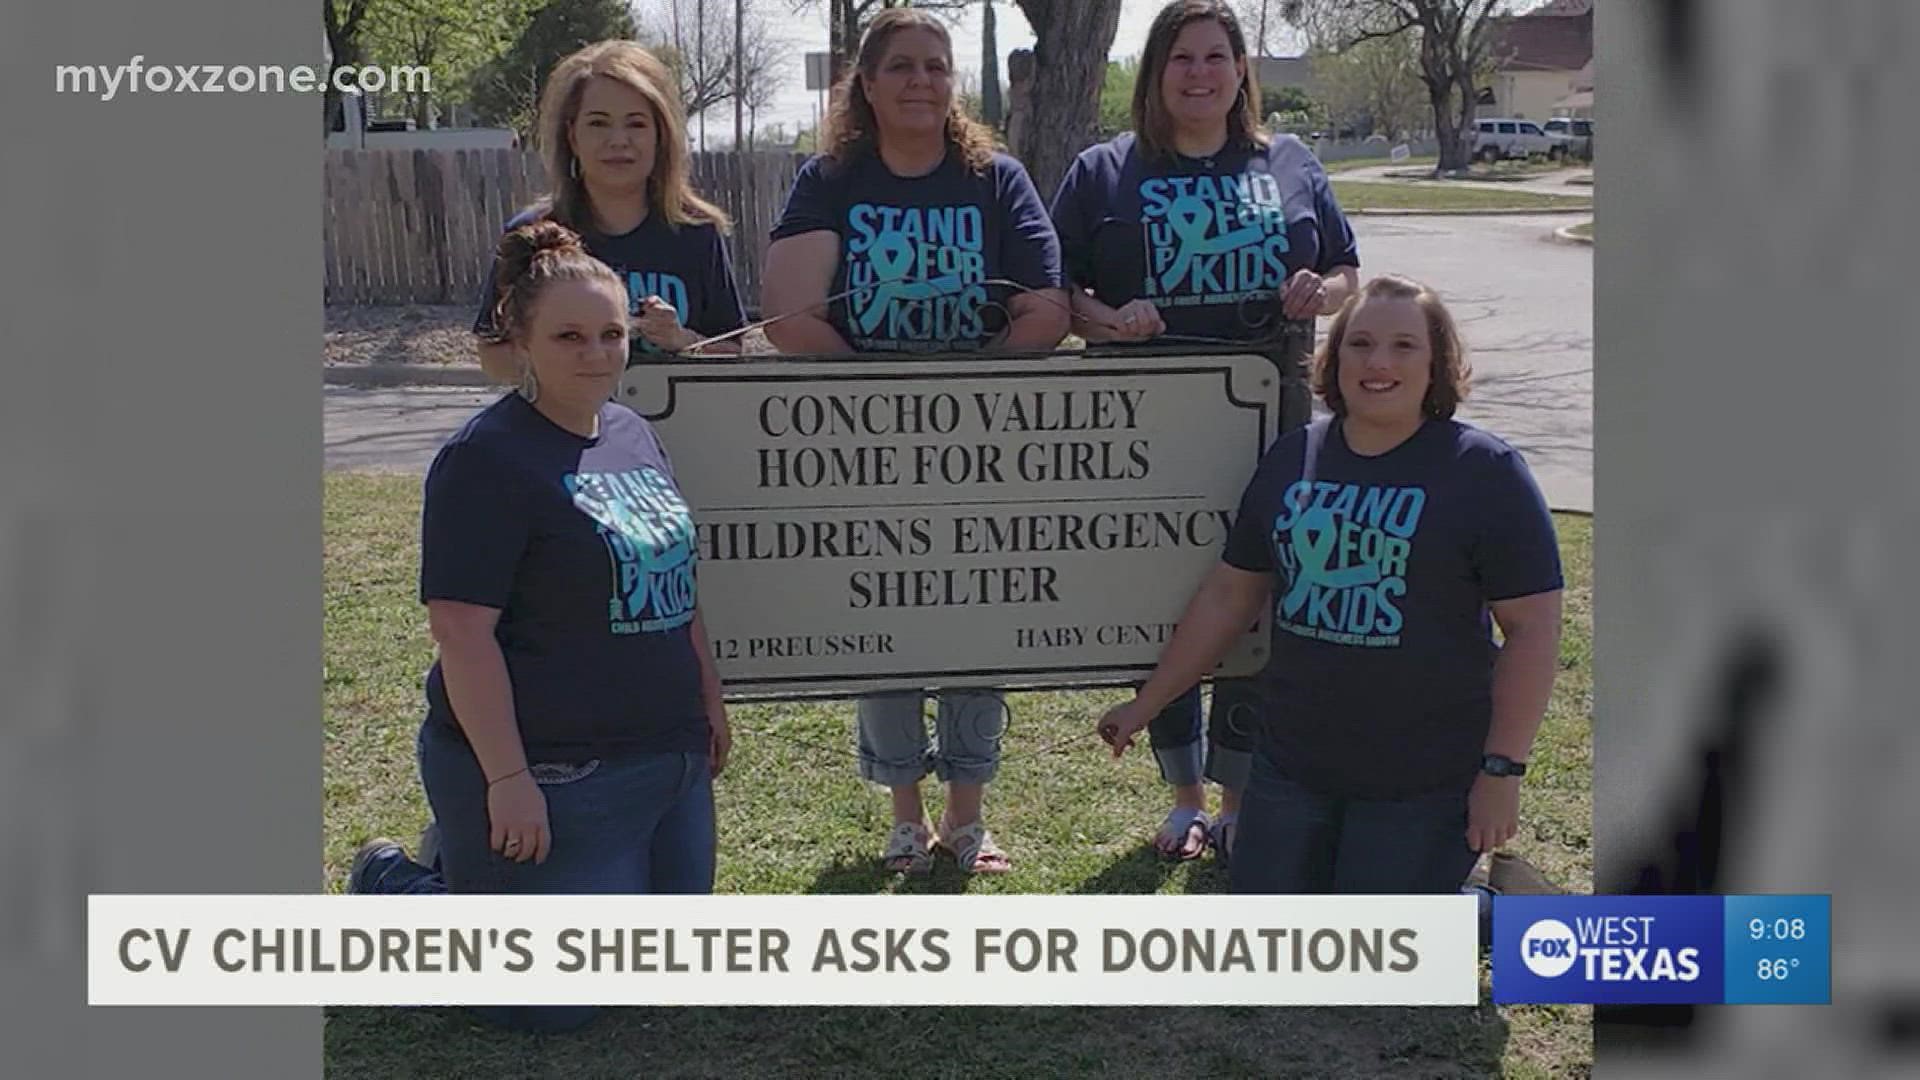 Hygiene products are a need at a local shelter in San Angelo.